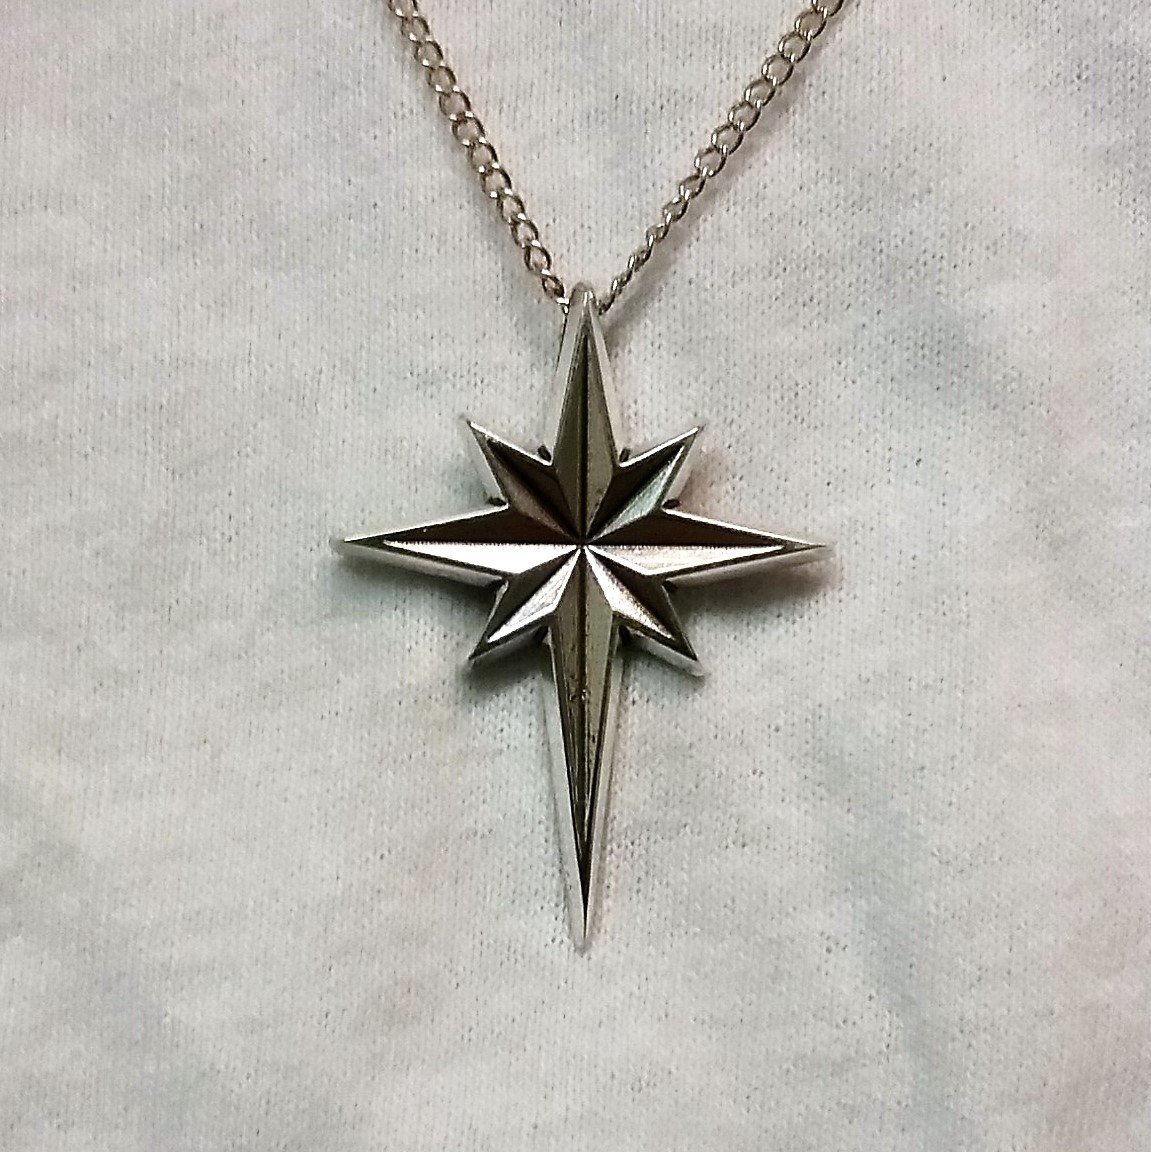 Brian May's "Back to the Light" Star pendant